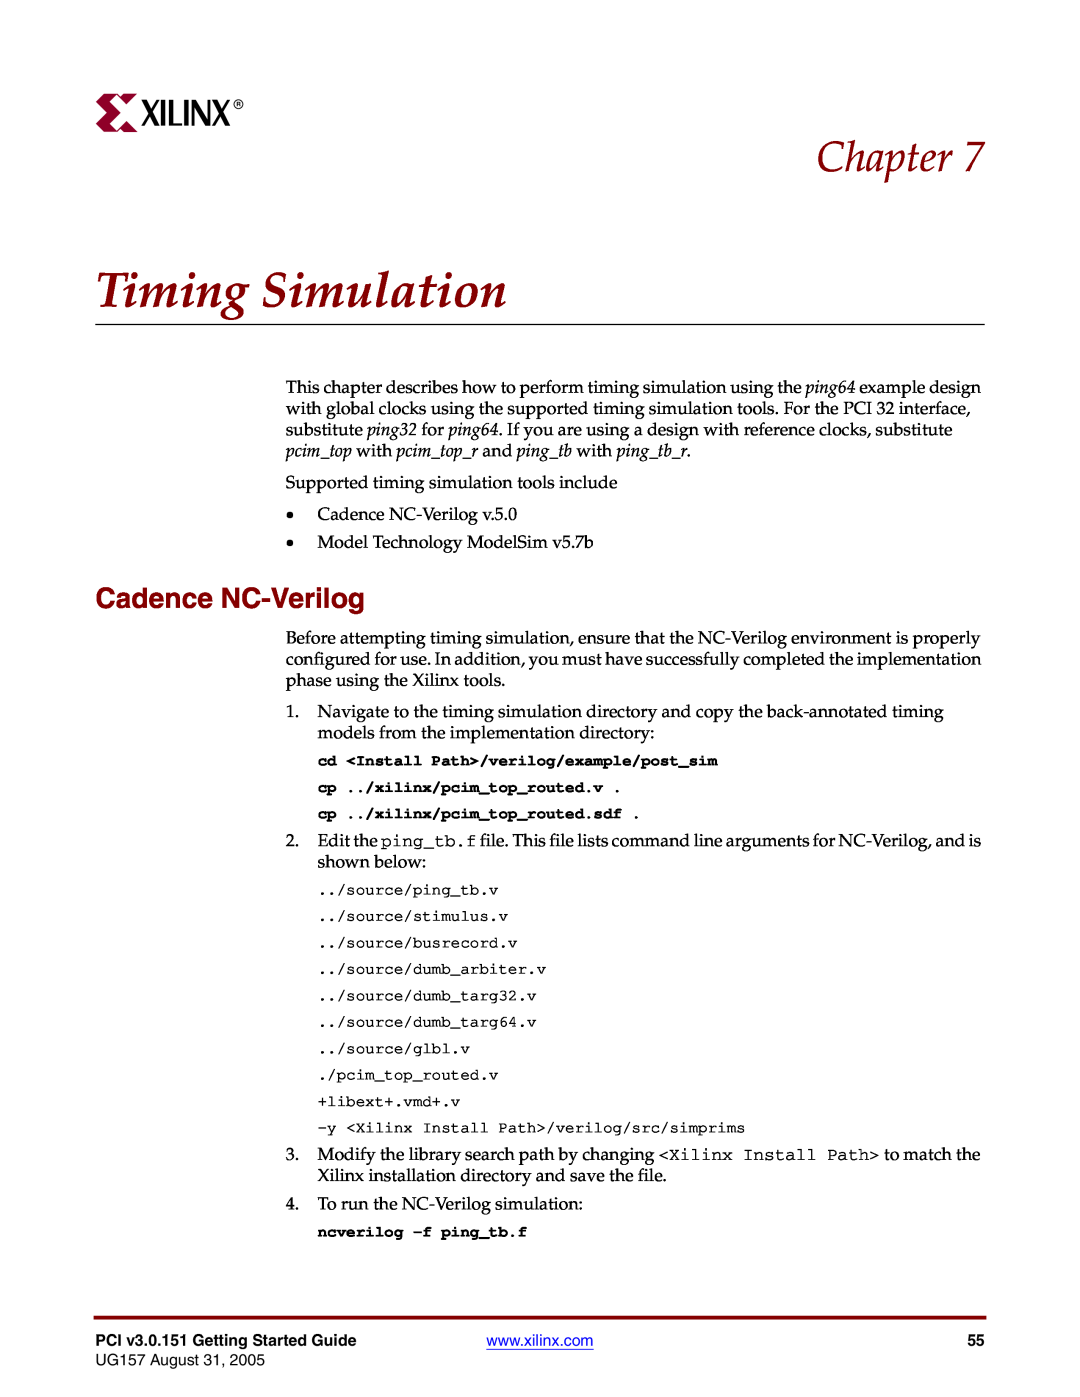 Xilinx PCI v3.0 manual Timing Simulation, Chapter, Cadence NC-Verilog, cp ../xilinx/pcimtoprouted.sdf 